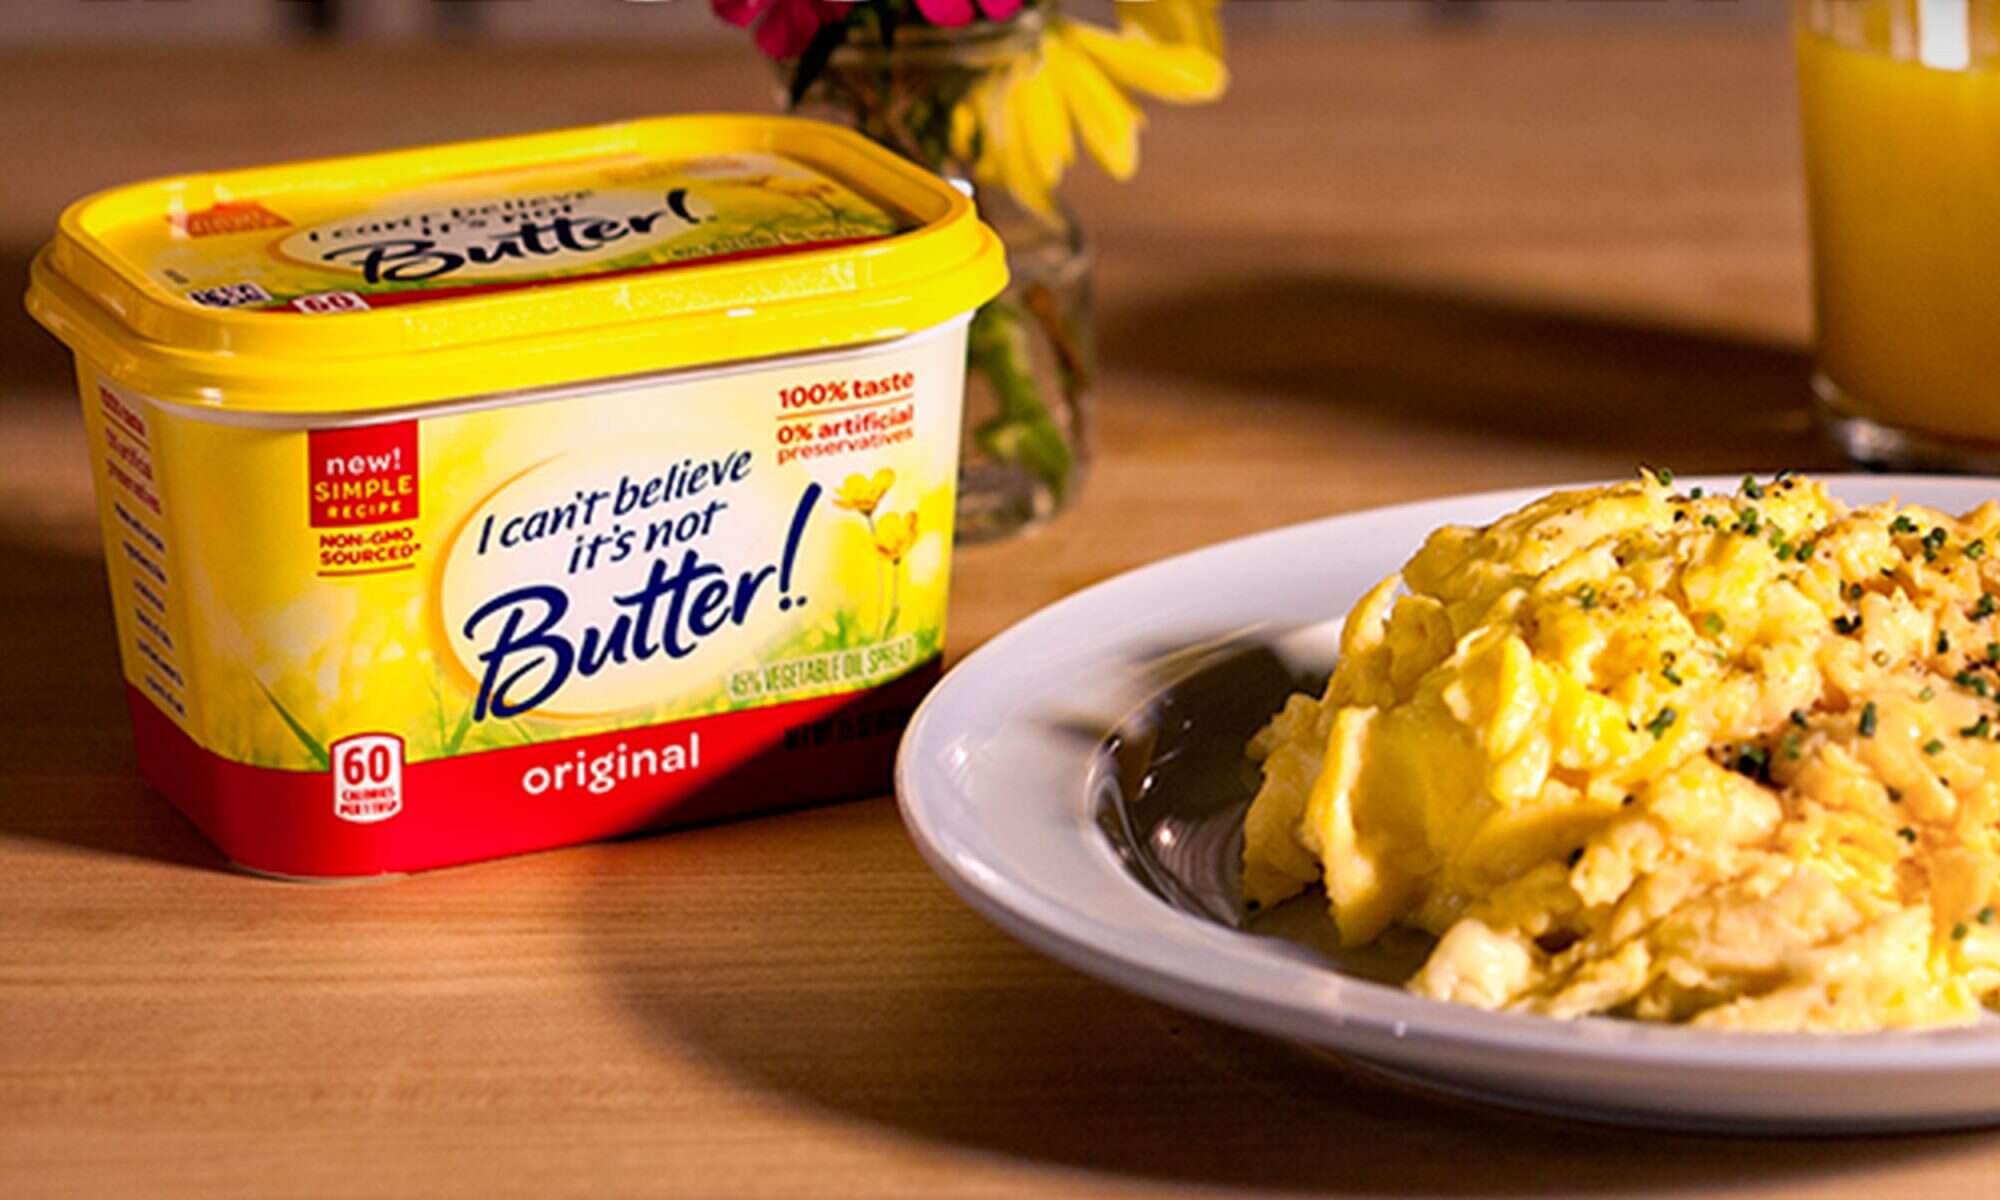 What's Really In I Can't Believe It's Not Butter?